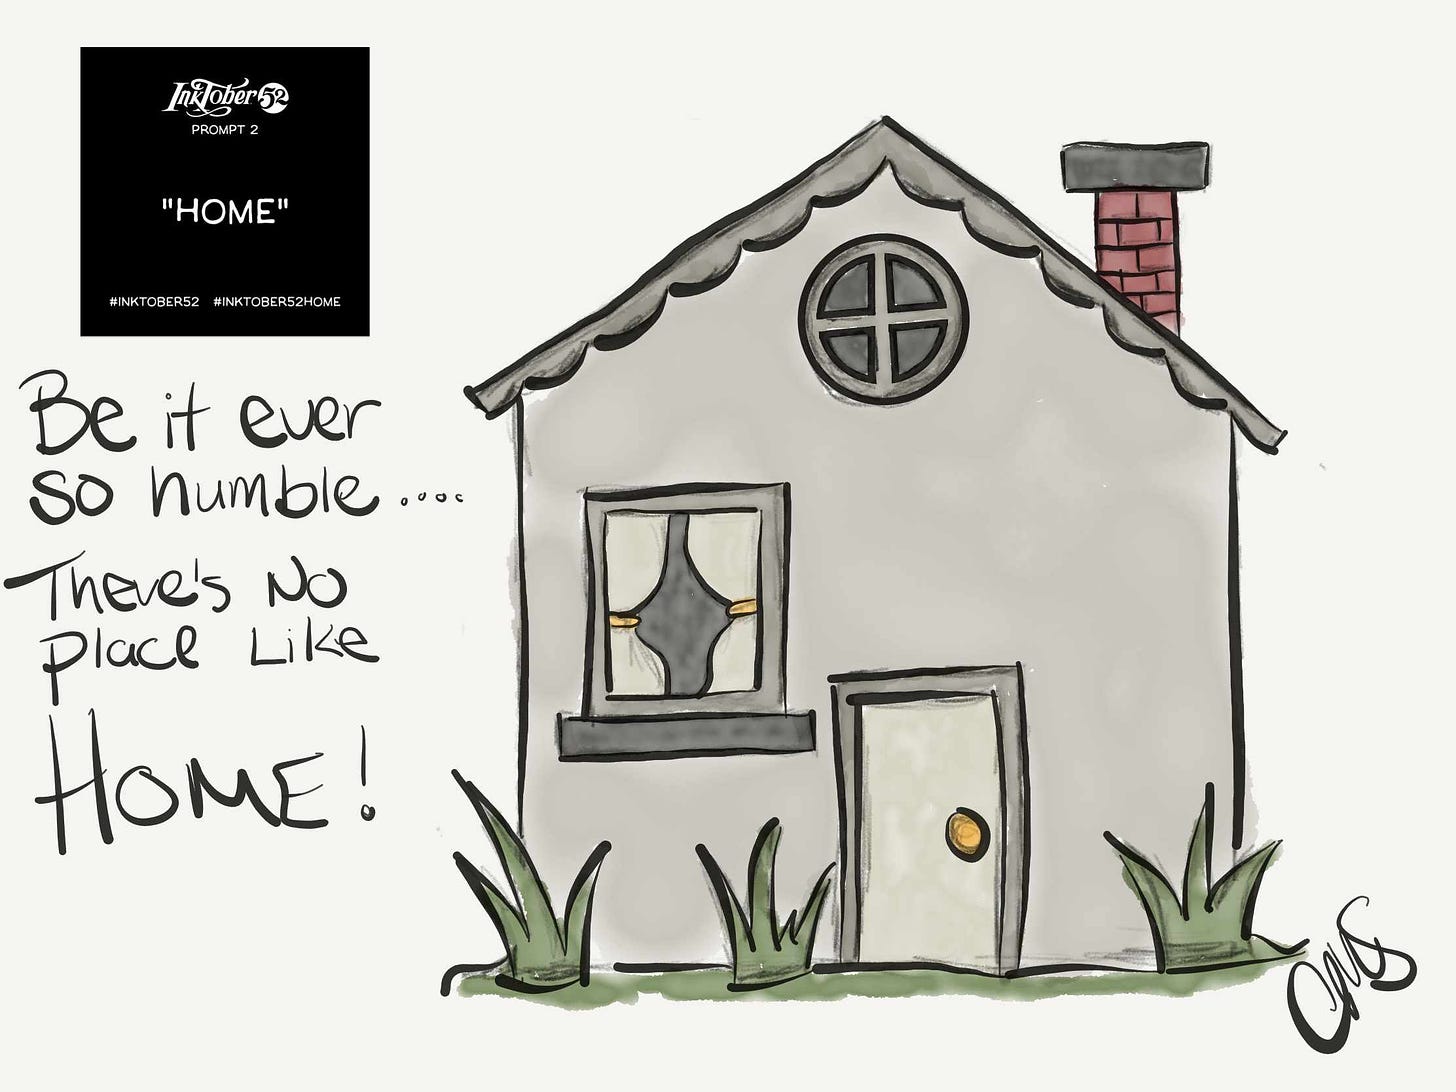 Simple sketch of a House. Colored in with a sumi ink or water color style. On left side there is a small square image that is the Inktober prompt and below that is handwritten text reading “be it ever so humble there’s no place like home”